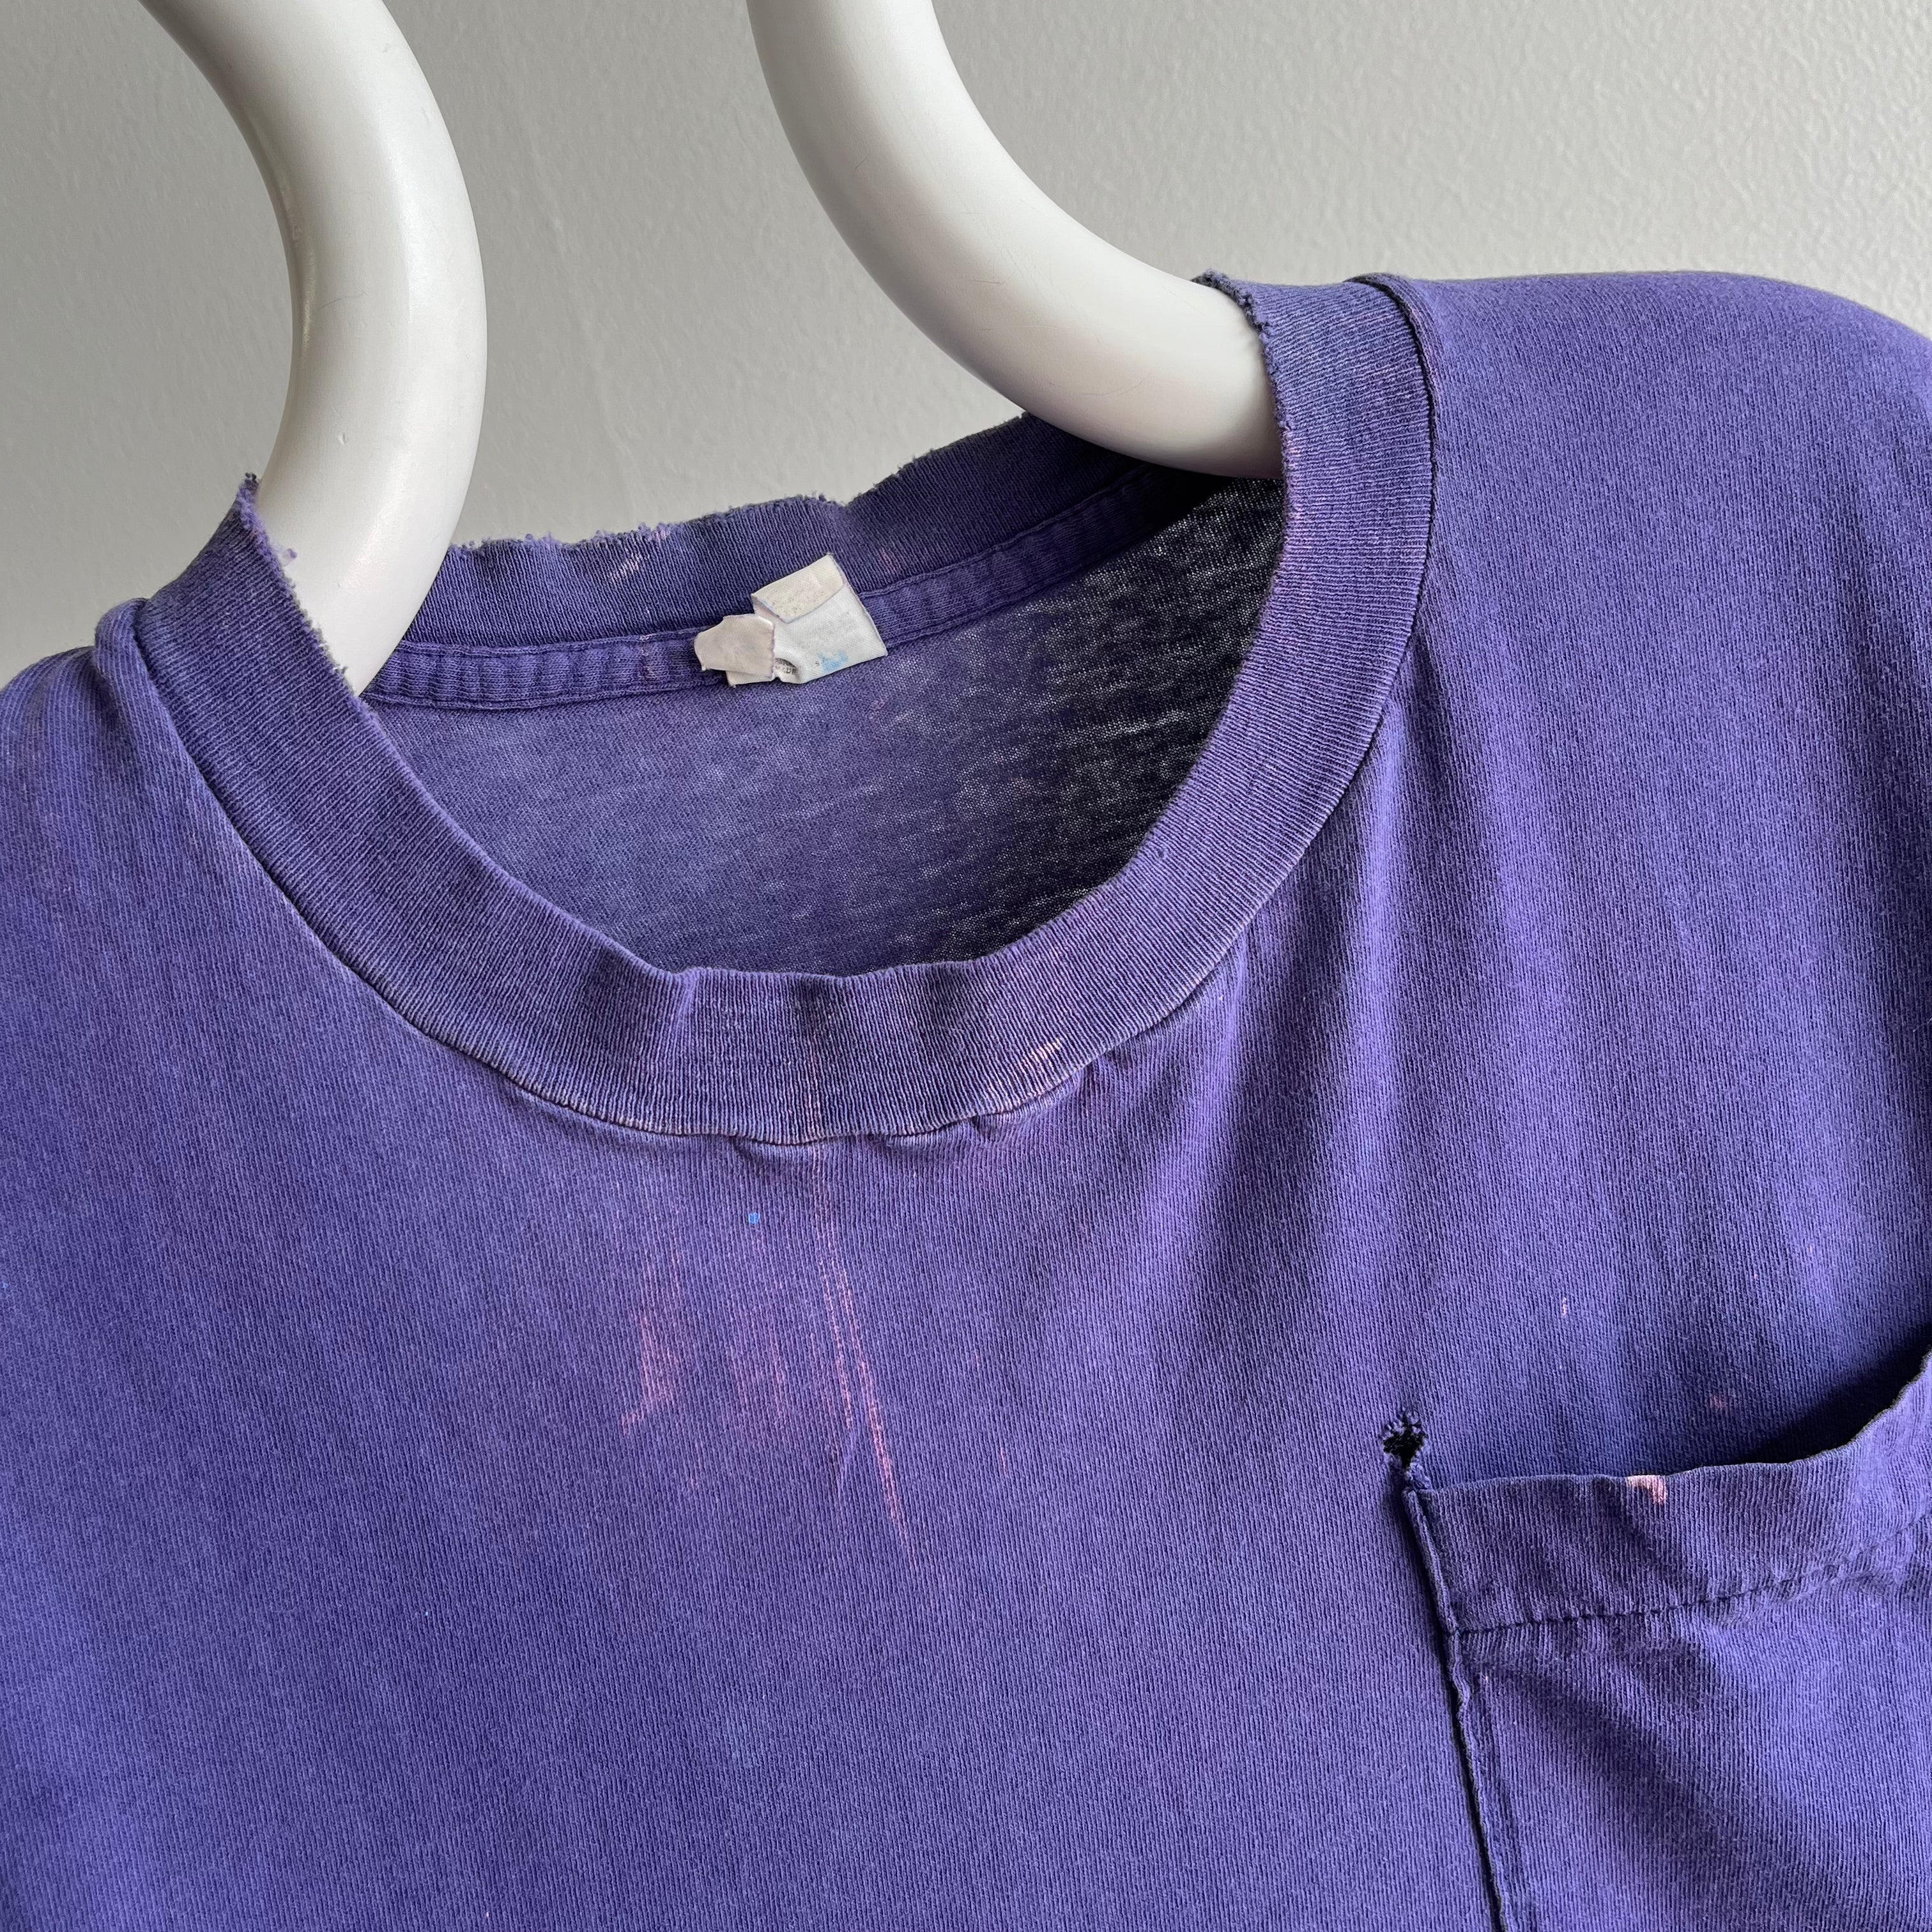 1980s Perfectly Worn and Bleach Stained Purple Single Stitch Selvedge Pocket T-Shirt